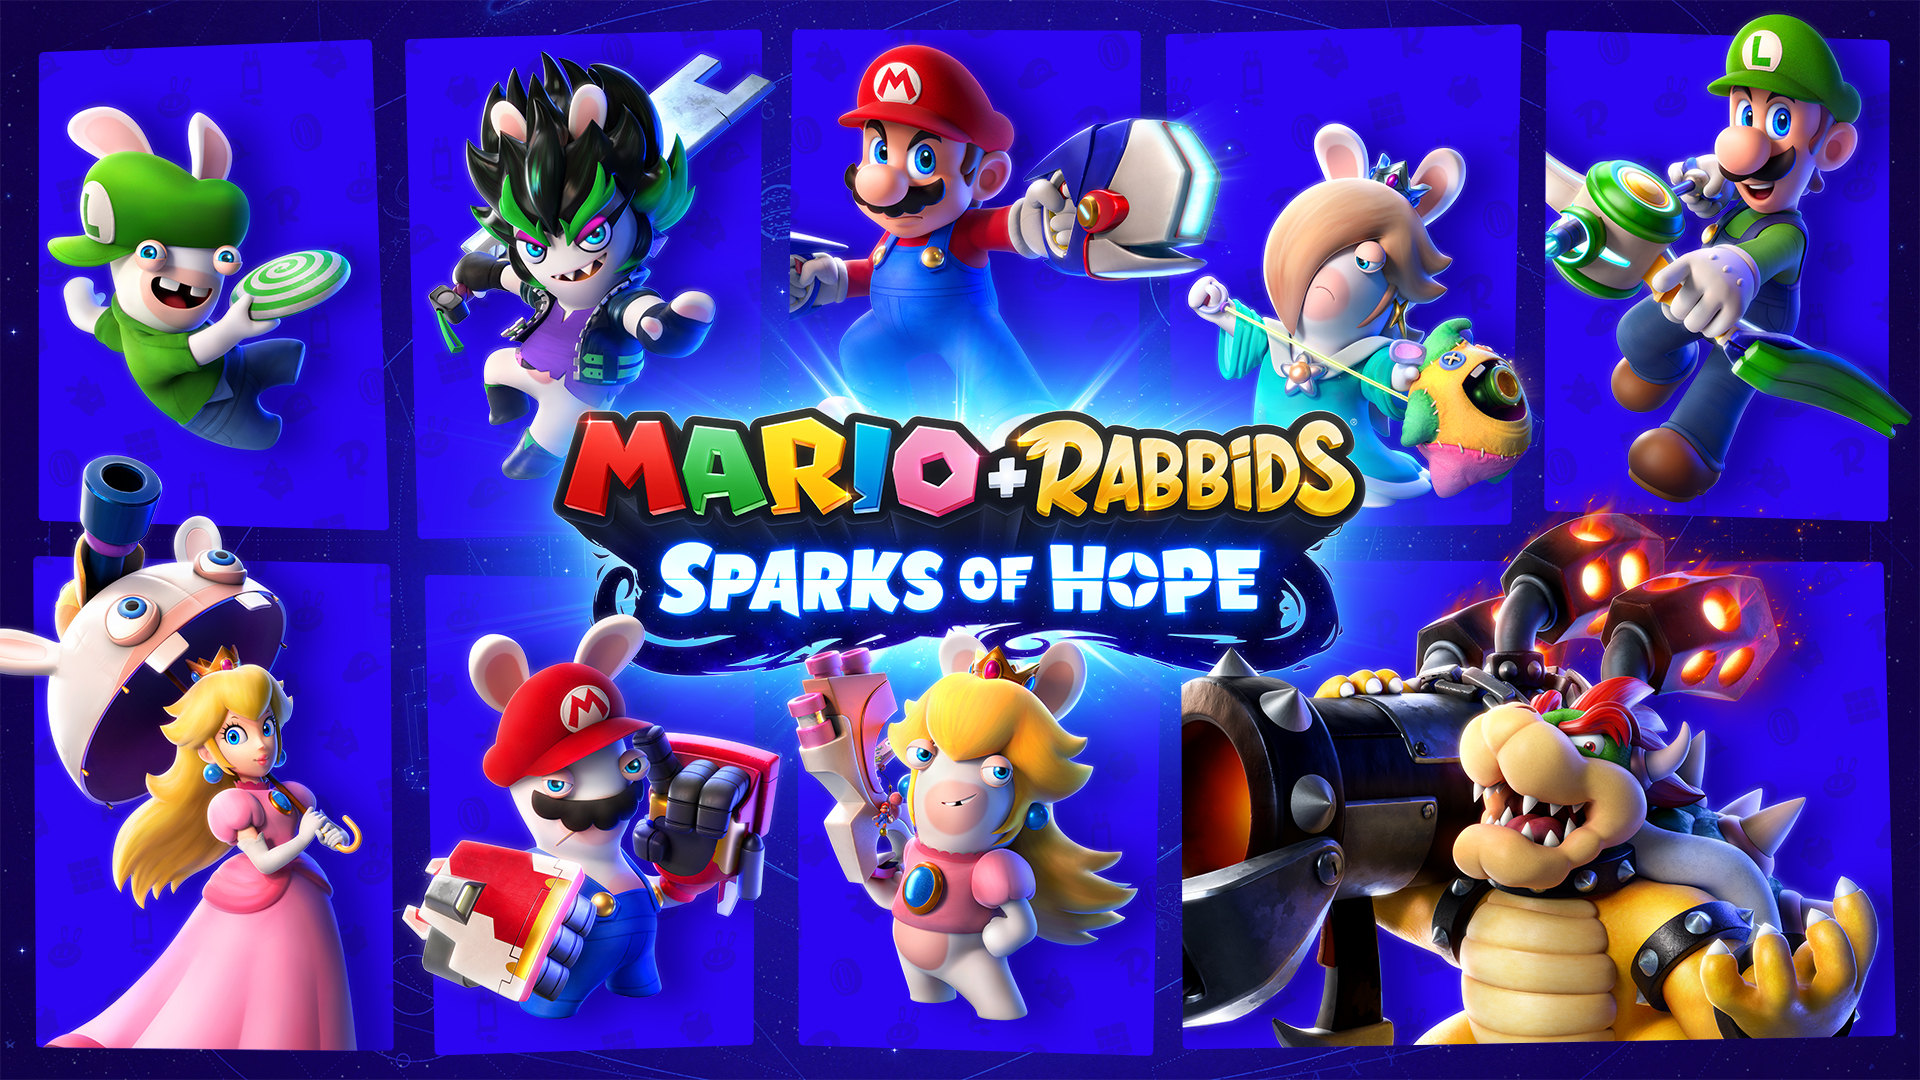 Mario + Rabbids Sparks of Hope are all the Heroes you can play in #MarioRabbids Sparks of Hope! Who will be your favorite trio in battle? ⚔️